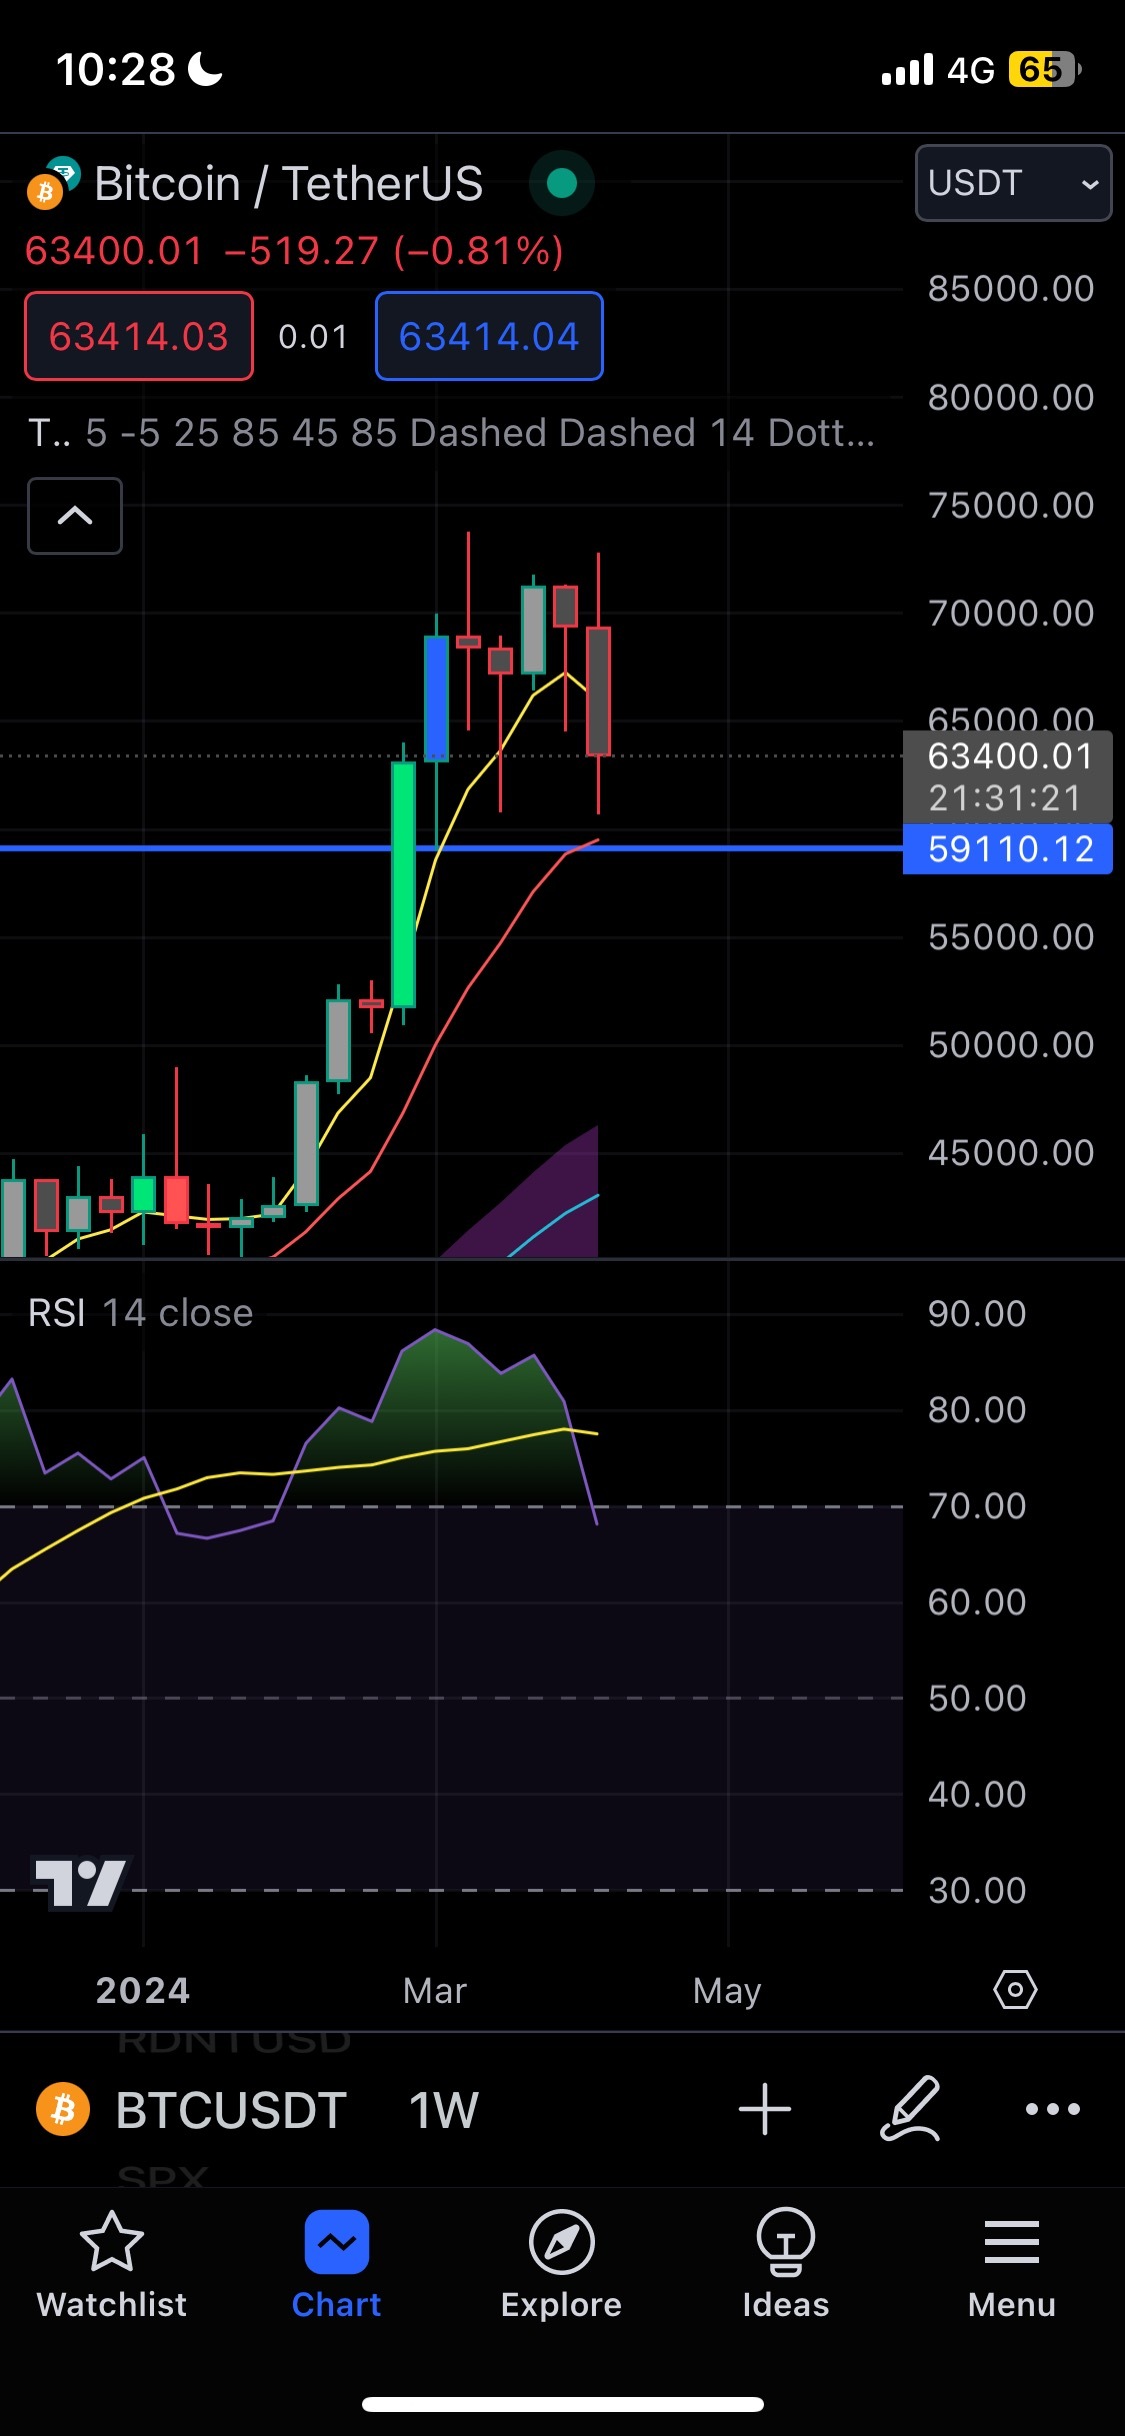 $Bitcoin (BTC.CC)$ have not filled the wick at 59k. will mr market maker take the liquidity ?